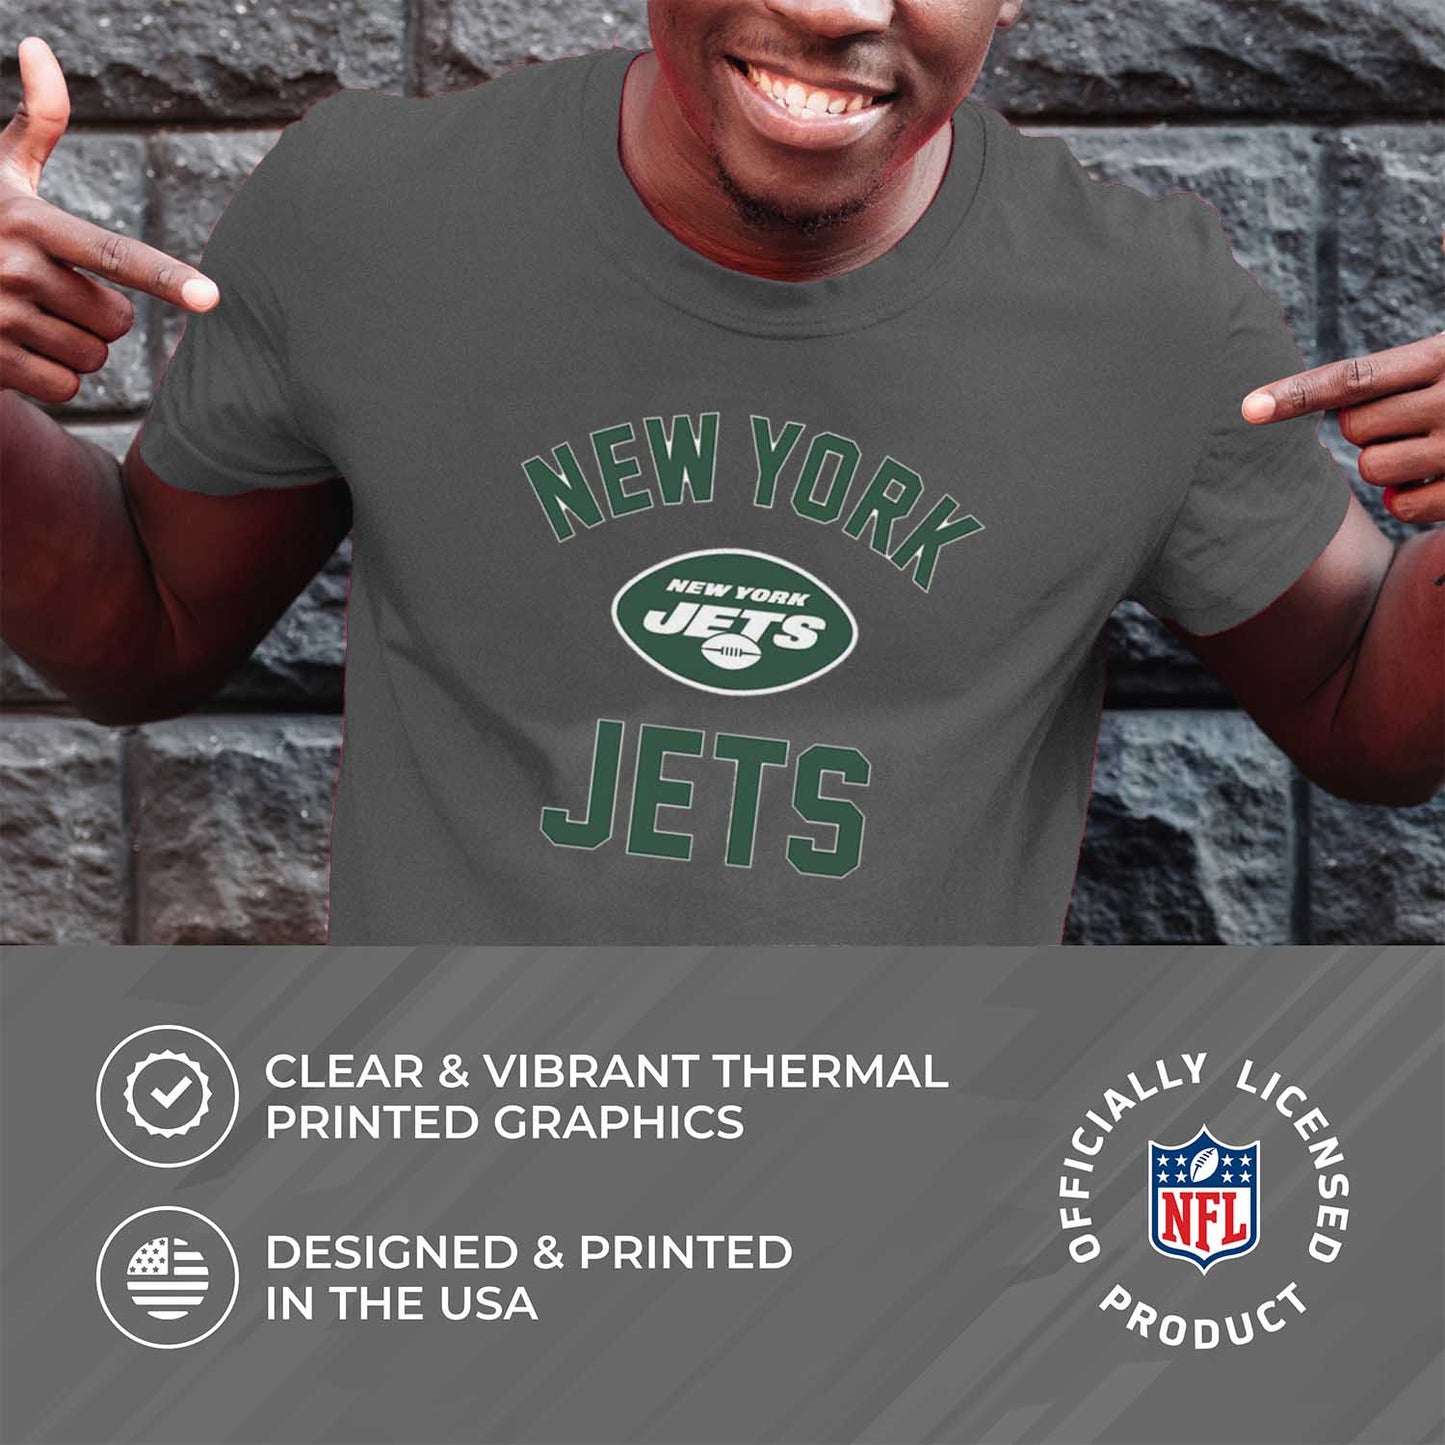 New York Jets NFL Adult Gameday T-Shirt - Gray